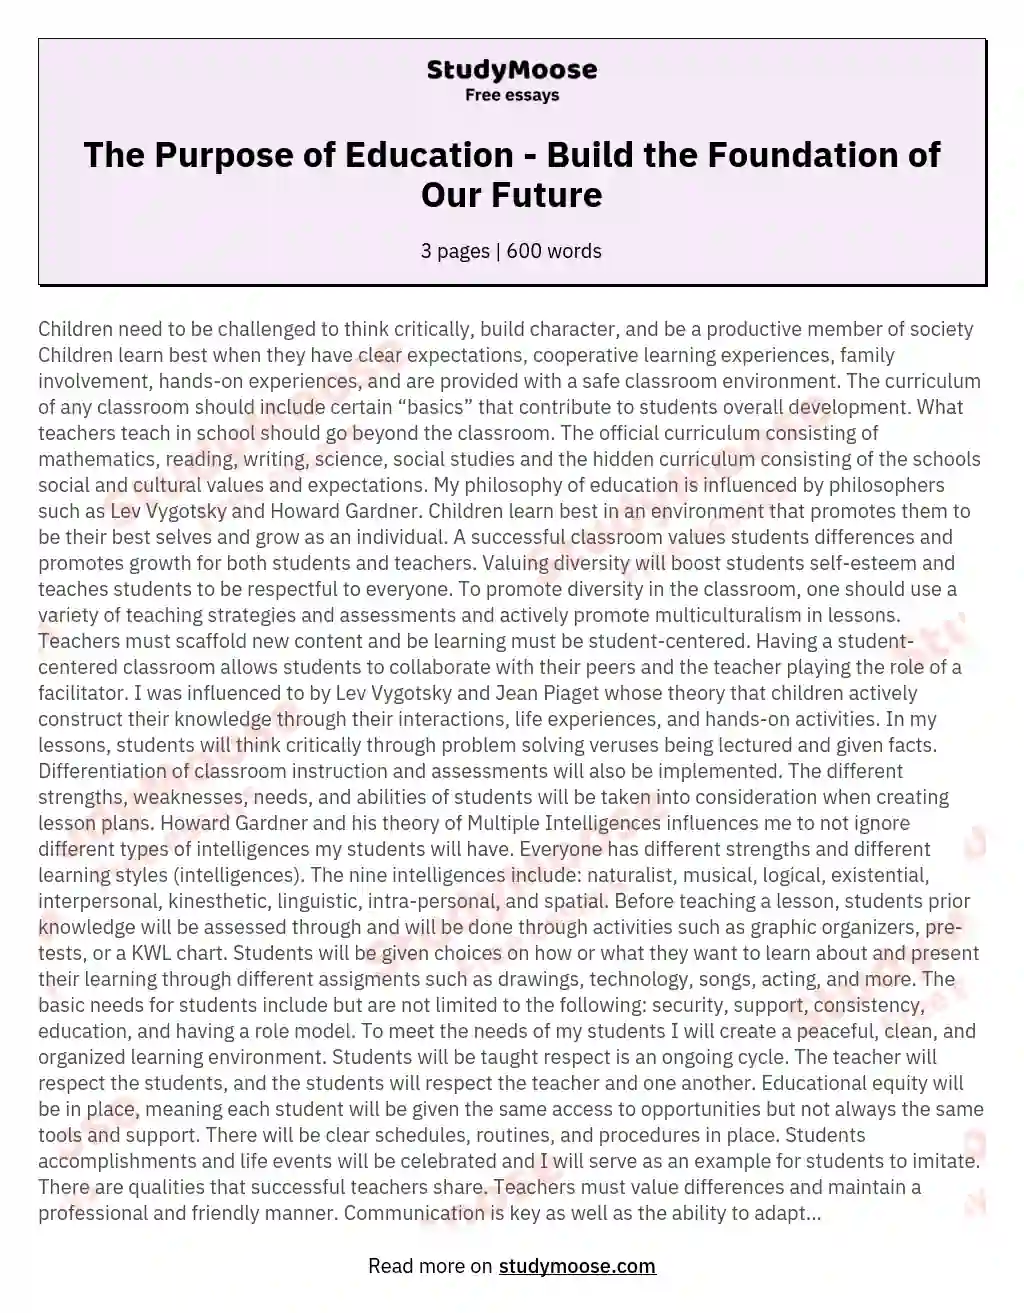 The Purpose of Education - Build the Foundation of Our Future essay